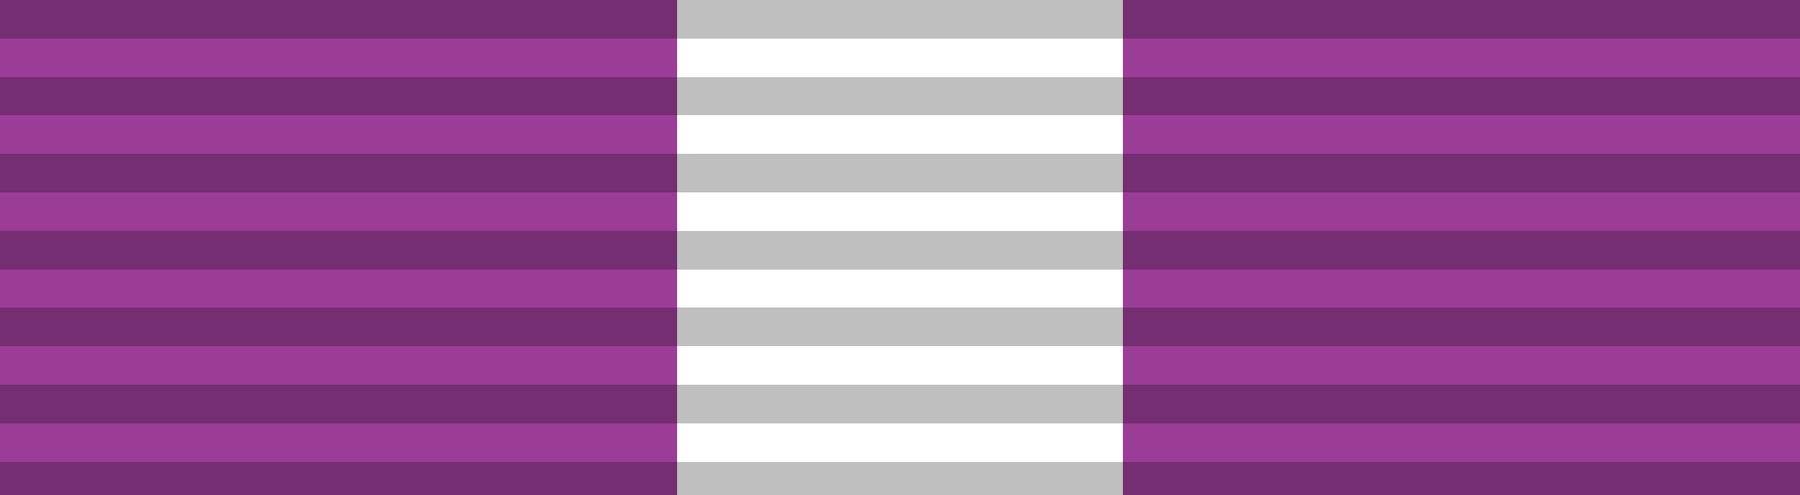 10 years Service Medal (Pakistan Armed Forces) - a purple and white striped pattern